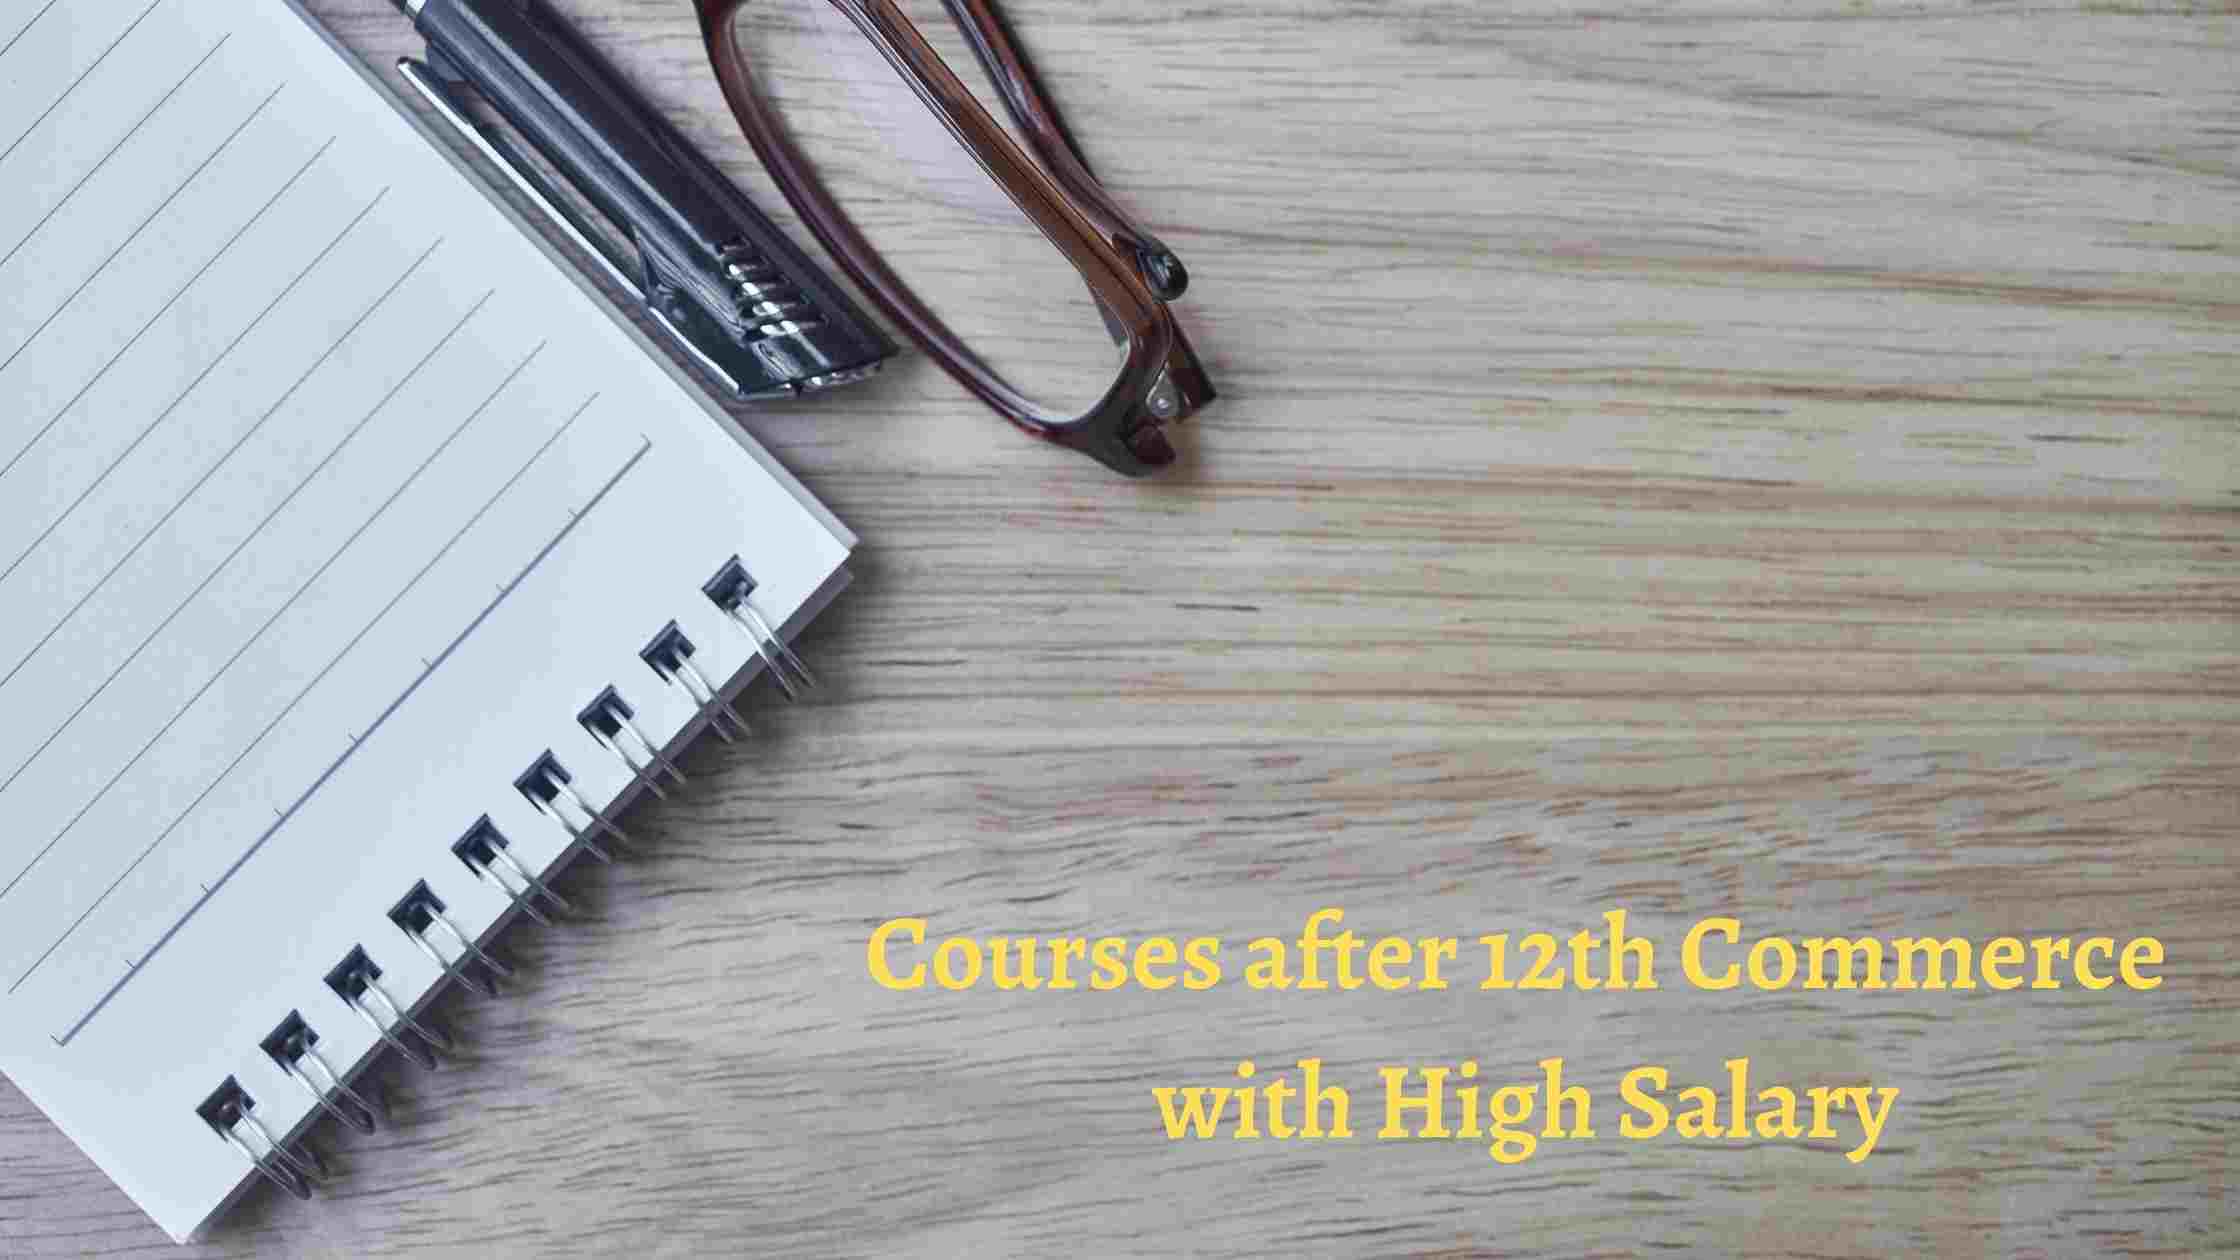 Courses after 12th Commerce with High Salary